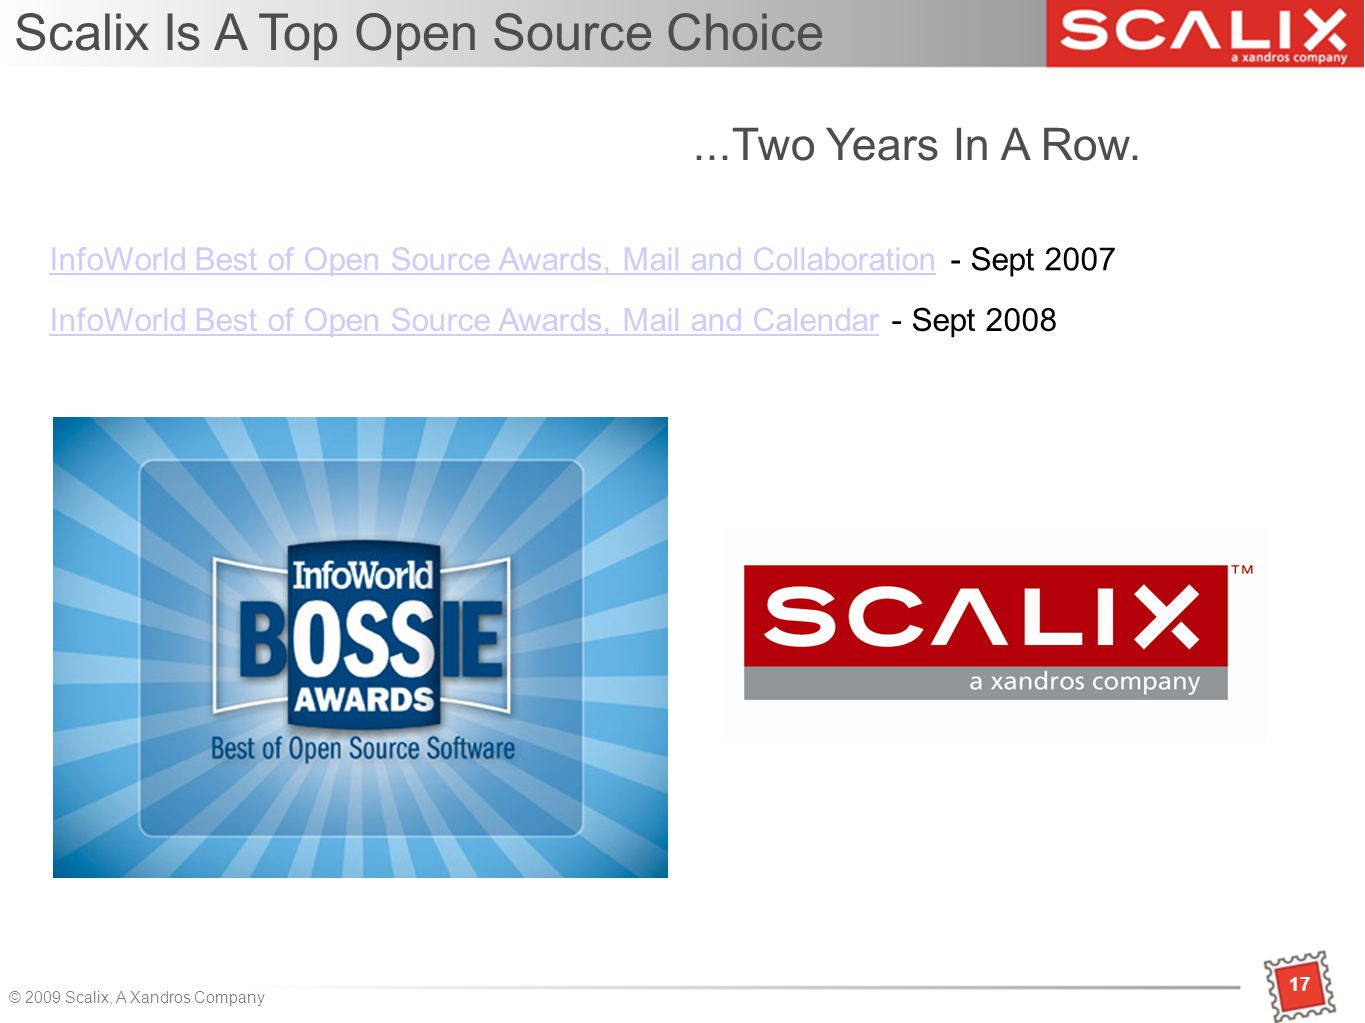 17 © 2009 Scalix, A Xandros Company 17 InfoWorld Best of Open Source Awards, Mail and CollaborationInfoWorld Best of Open Source Awards, Mail and Collaboration - Sept 2007 Scalix Is A Top Open Source Choice InfoWorld Best of Open Source Awards, Mail and CalendarInfoWorld Best of Open Source Awards, Mail and Calendar - Sept Two Years In A Row.